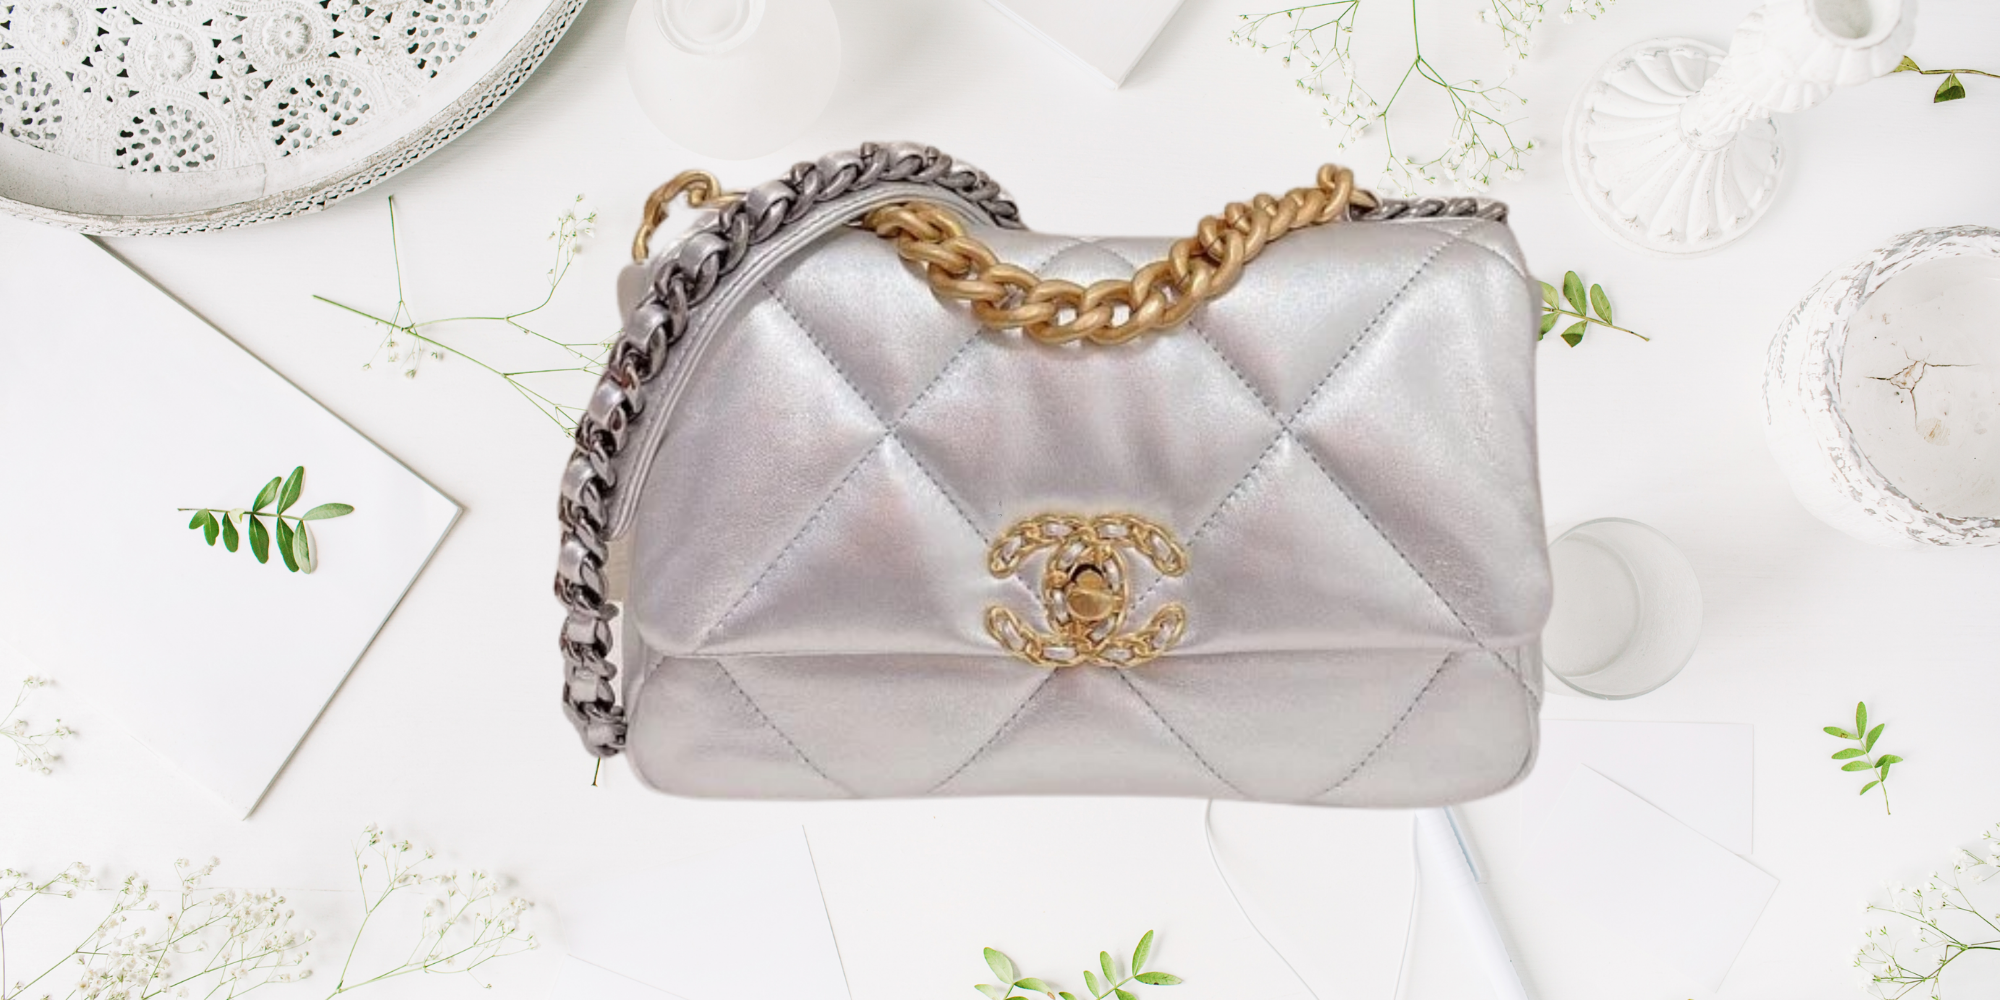 YOUR IT BAG GUIDE: CHANEL 19 BAG